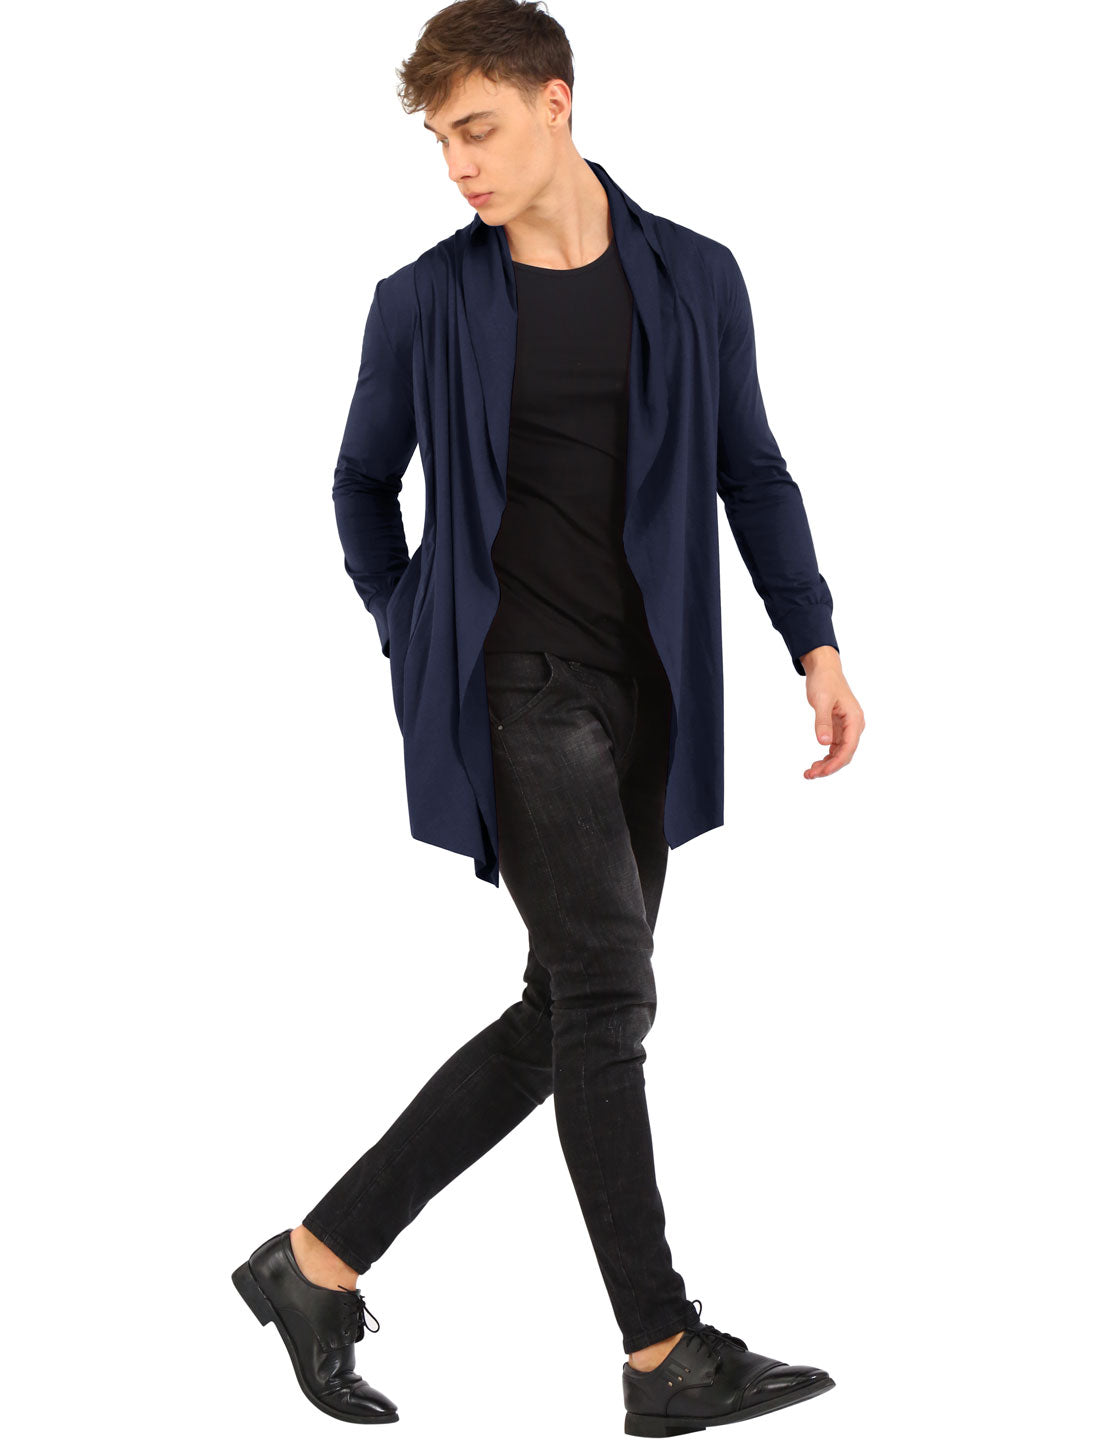 Bublédon Shawl Collar Open Front Long Sleeve Solid Jacket